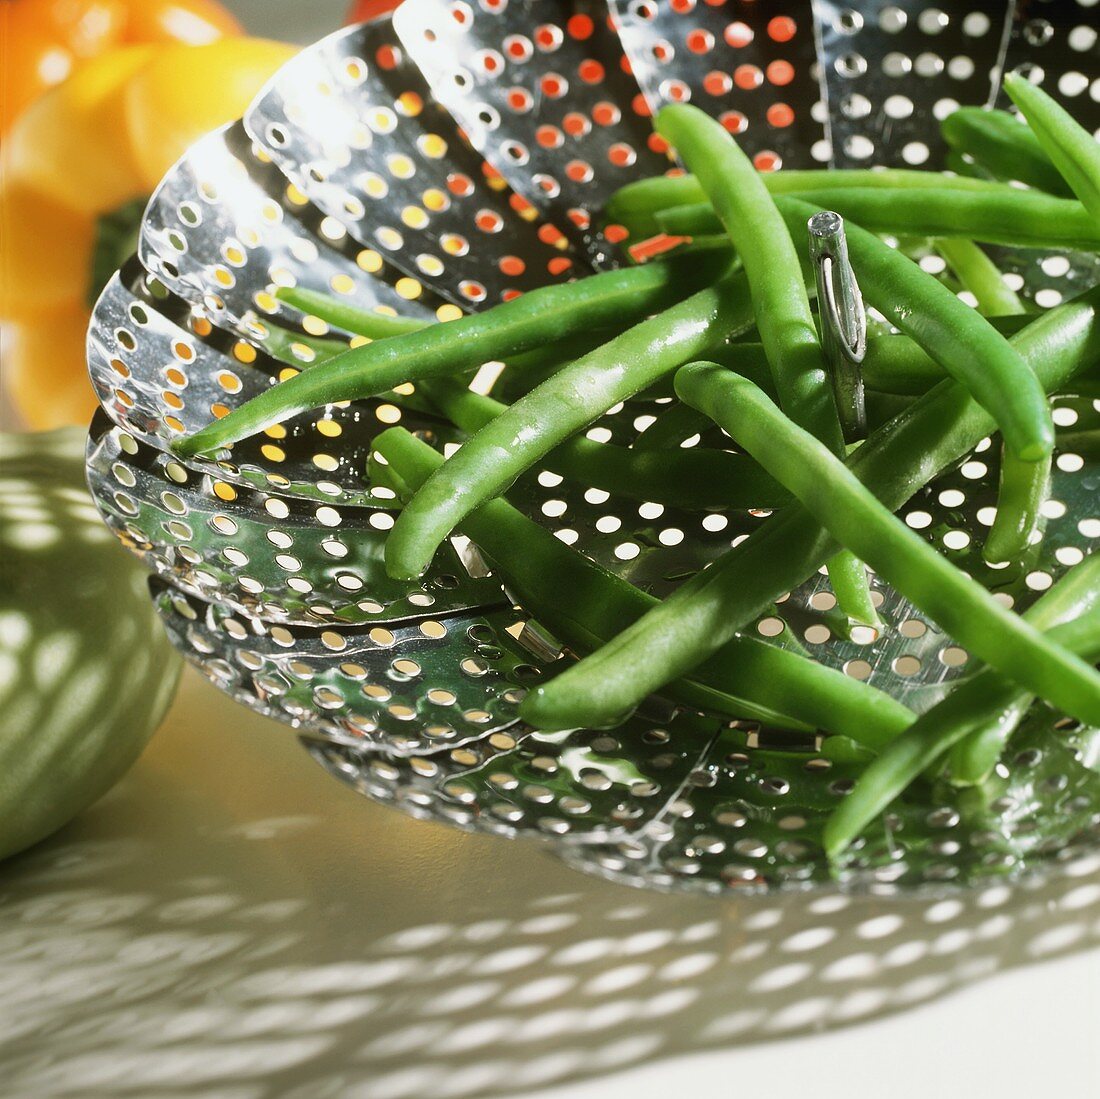 Green Beans in a Vegetable Steamer